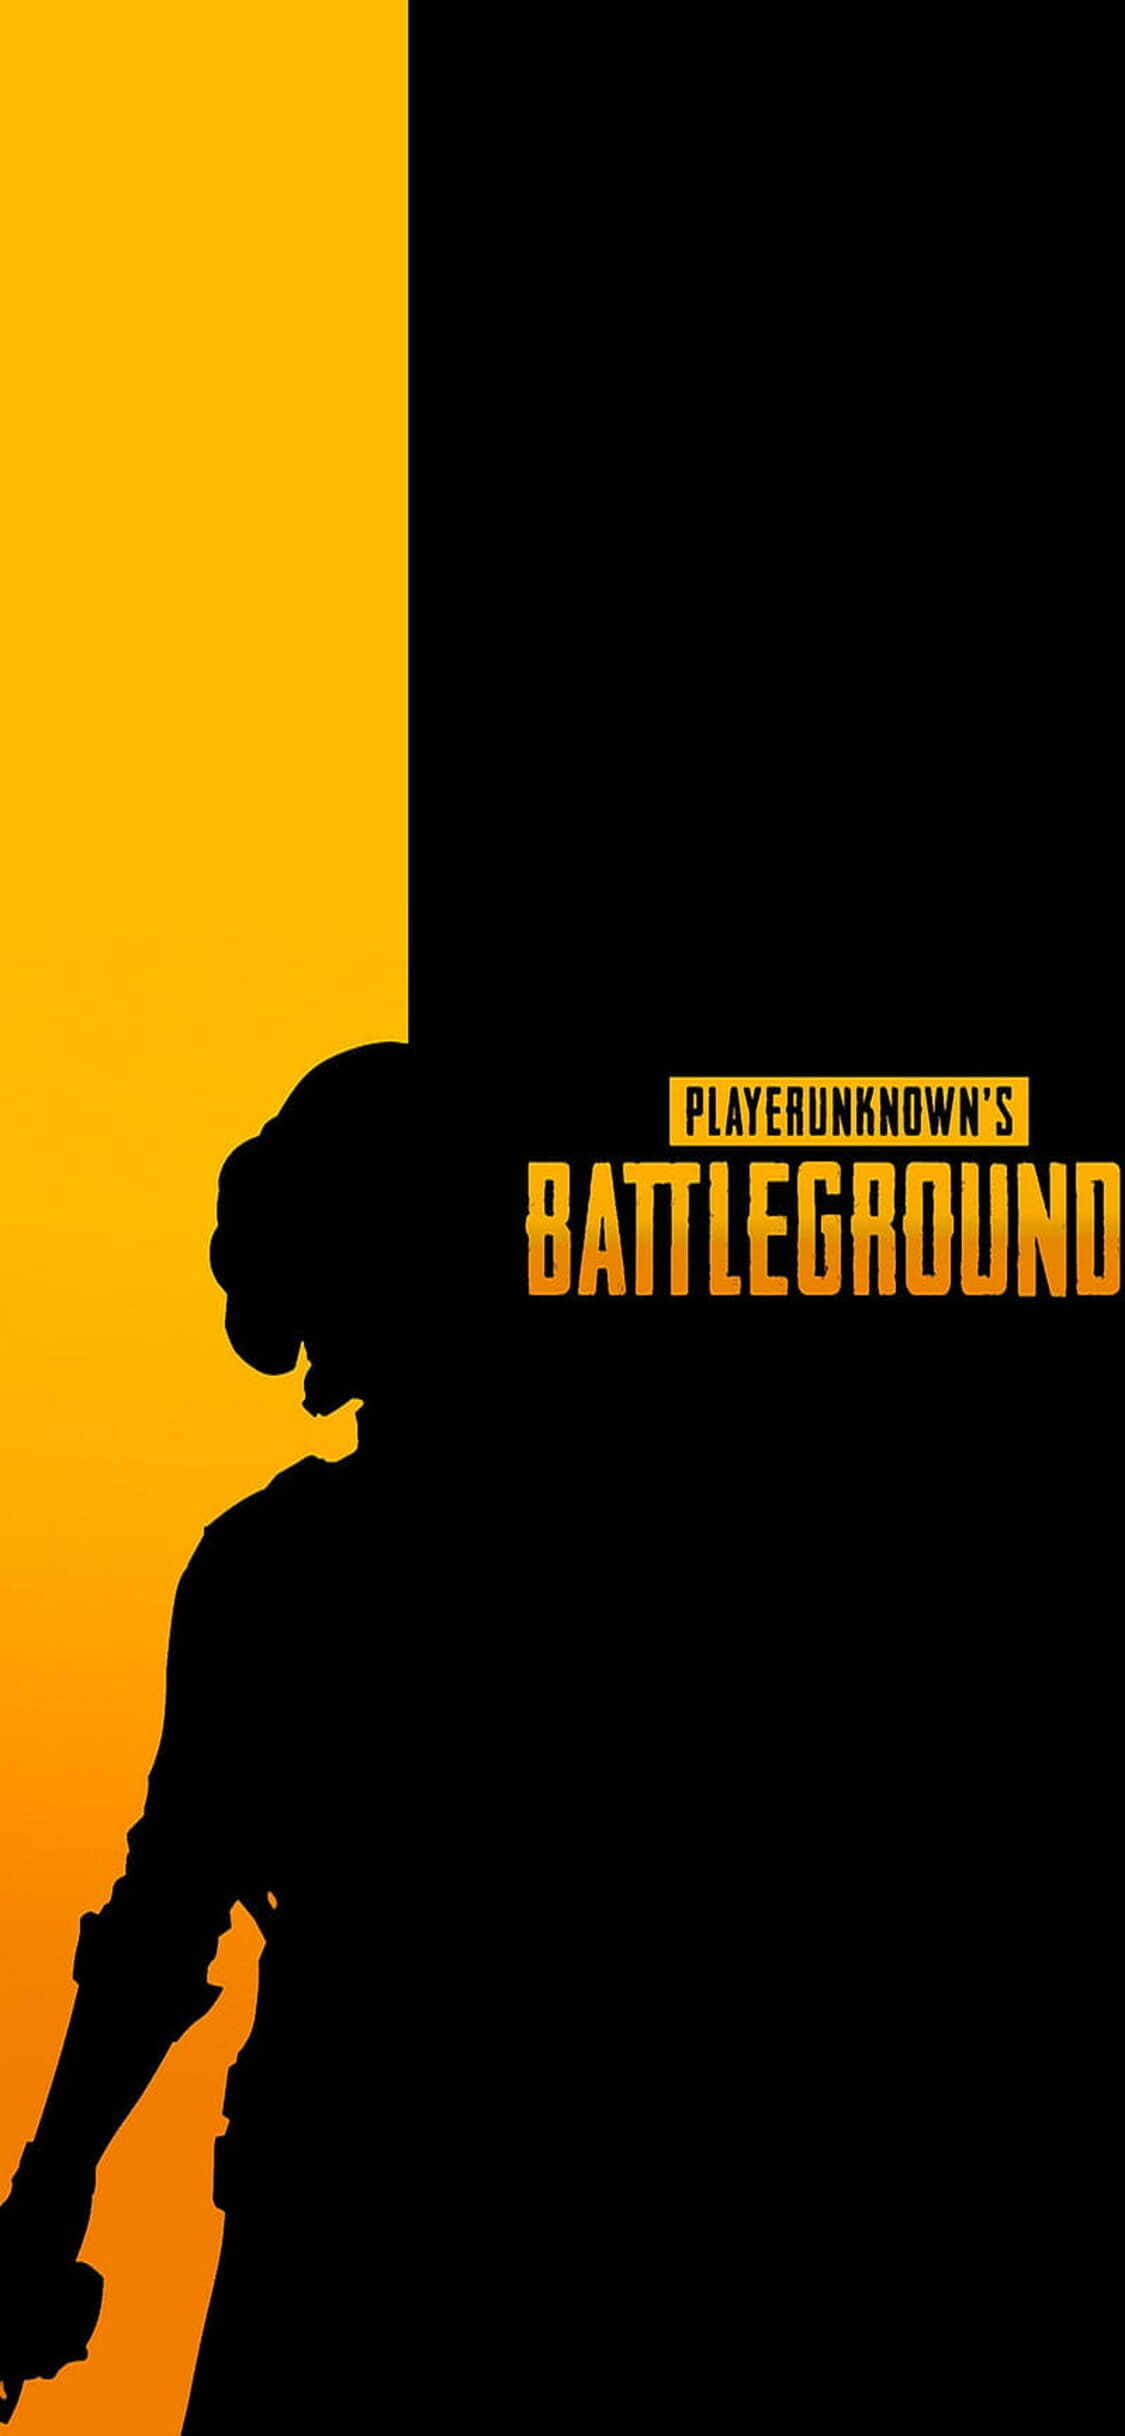 Experience The Excitement Of Playerunknown's Battlegrounds On Your Iphone X